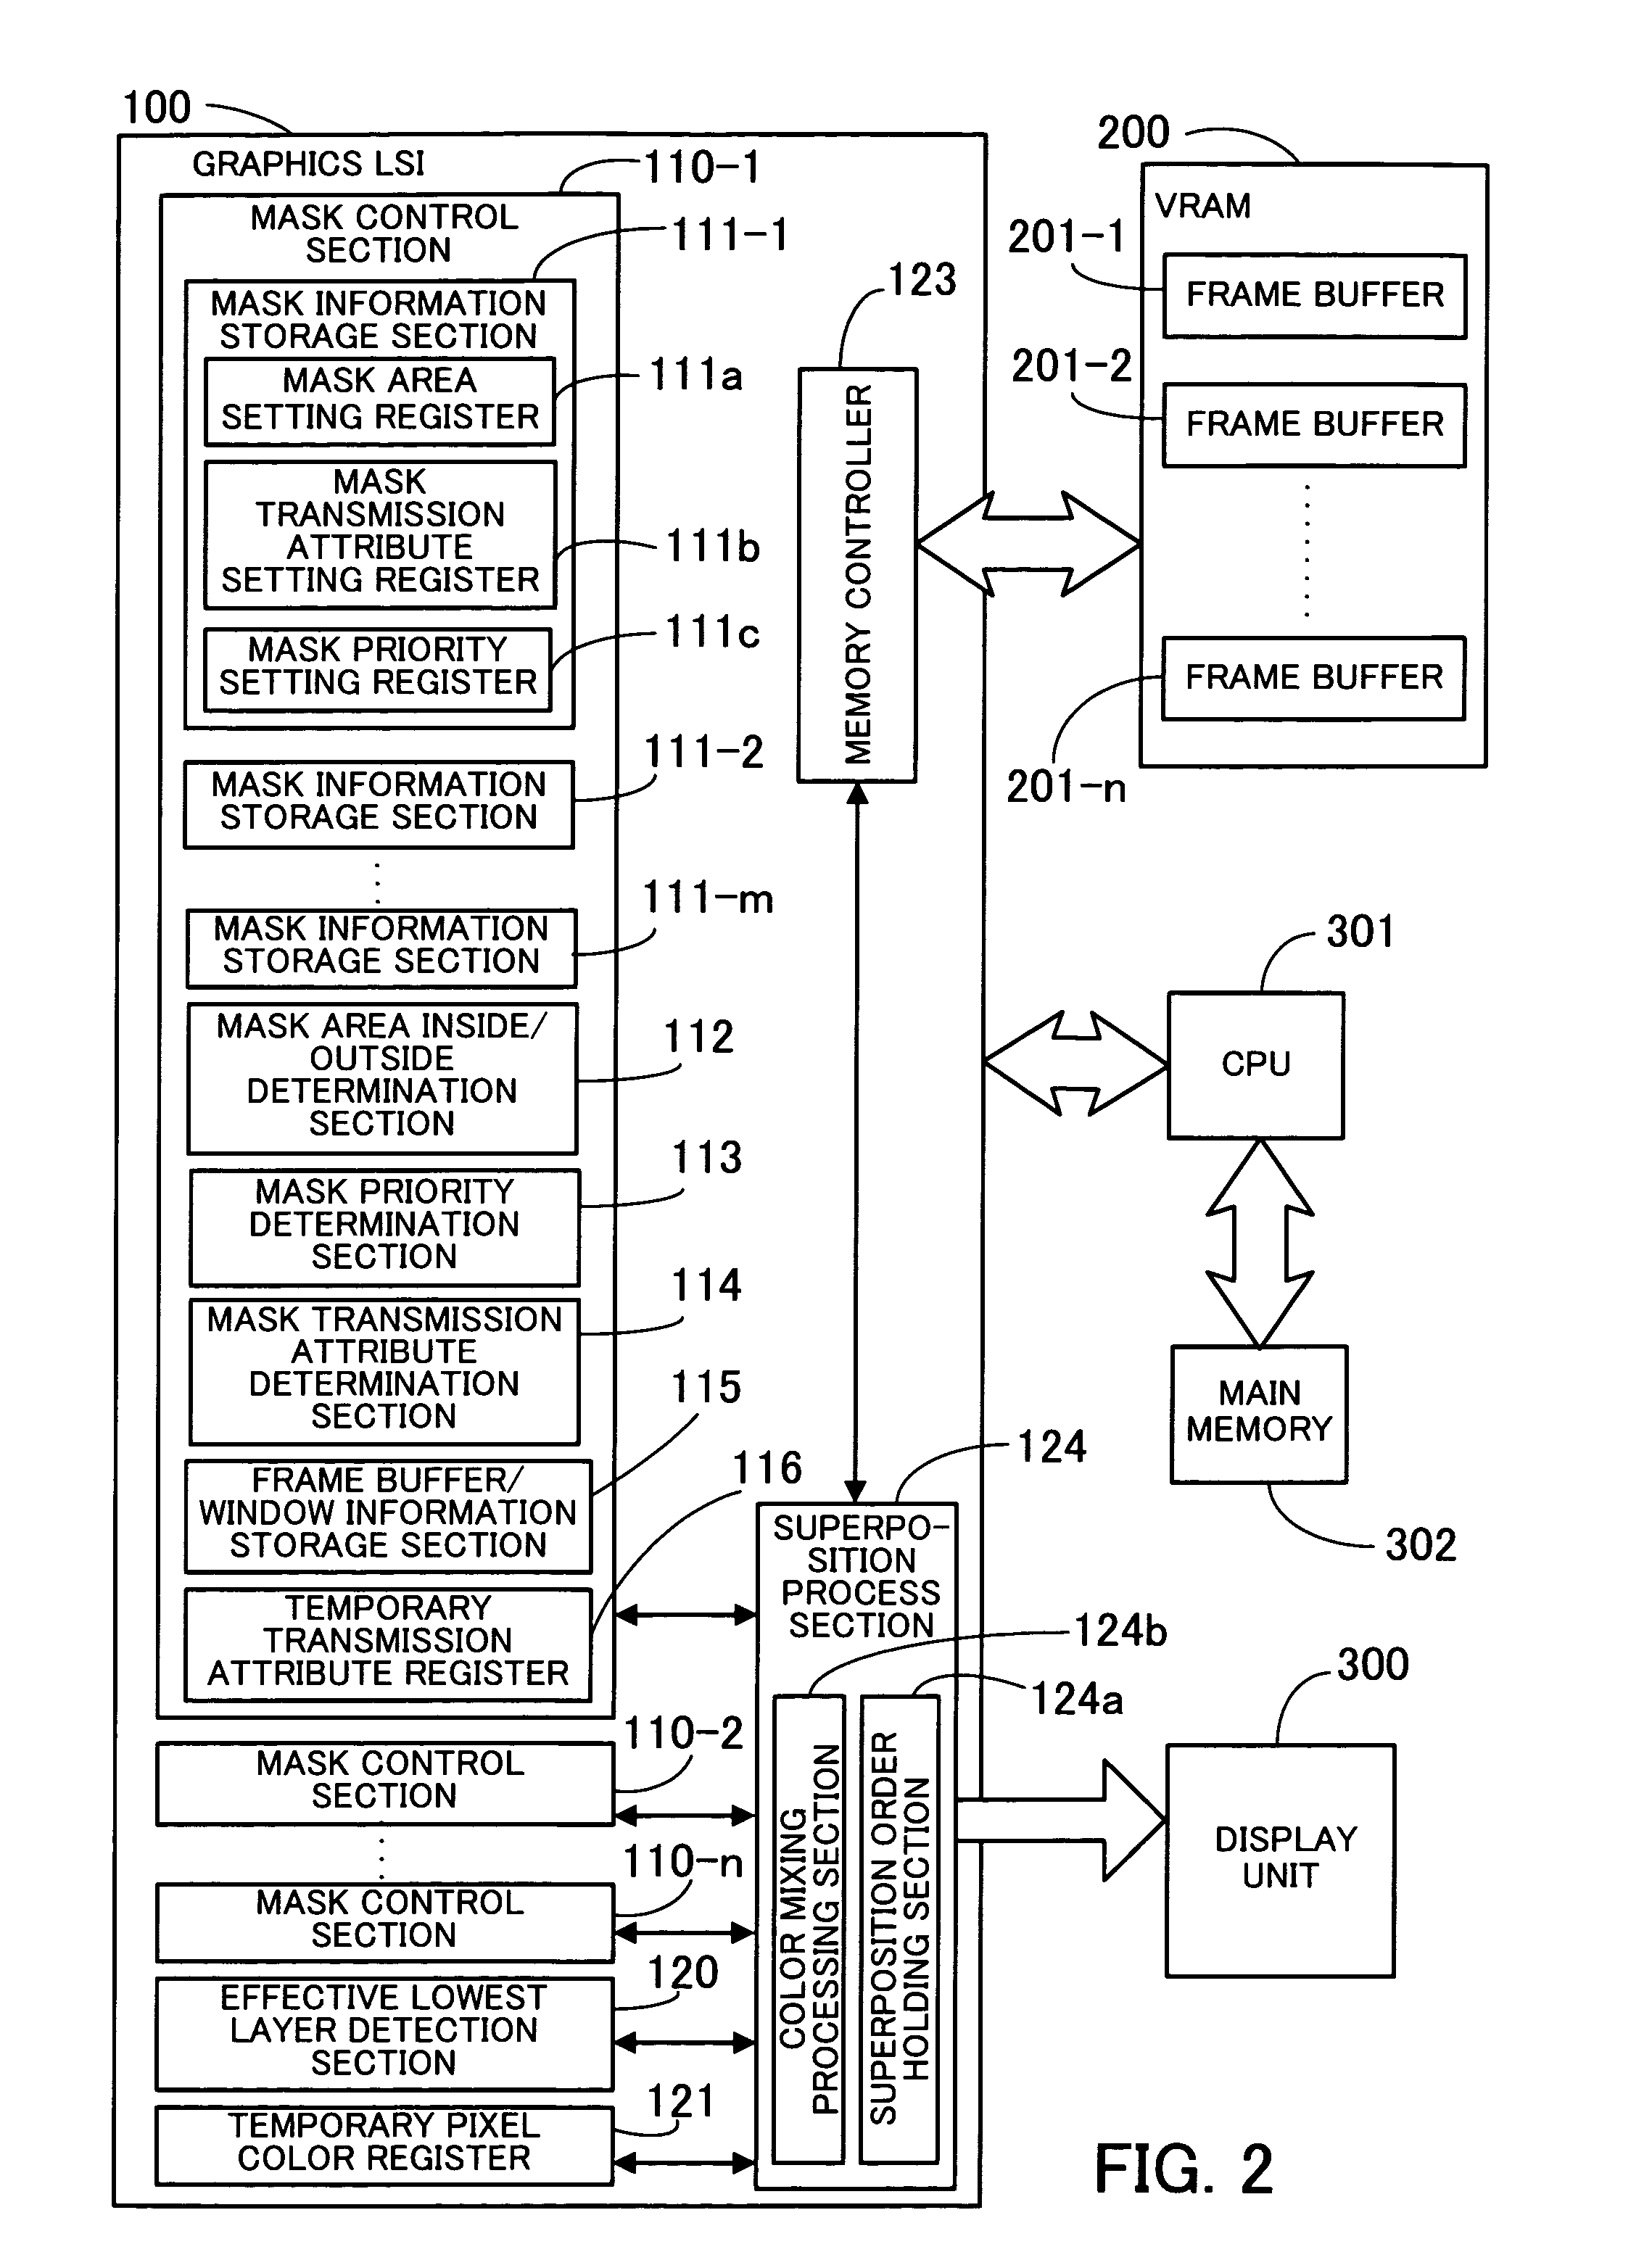 Image processing apparatus and graphics memory unit